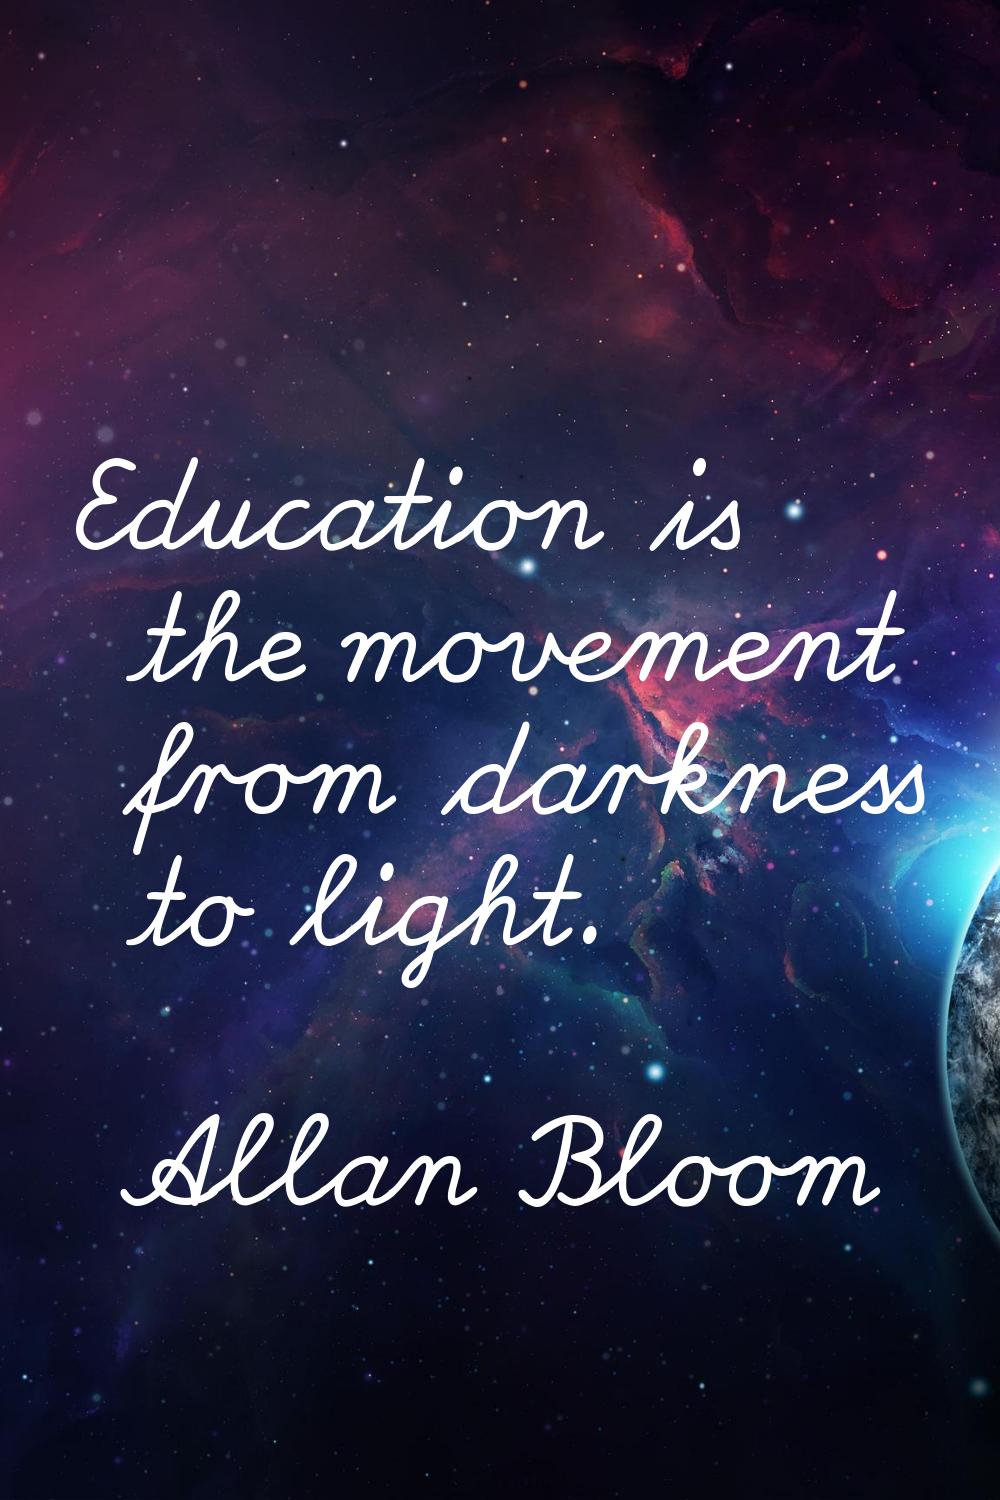 Education is the movement from darkness to light.